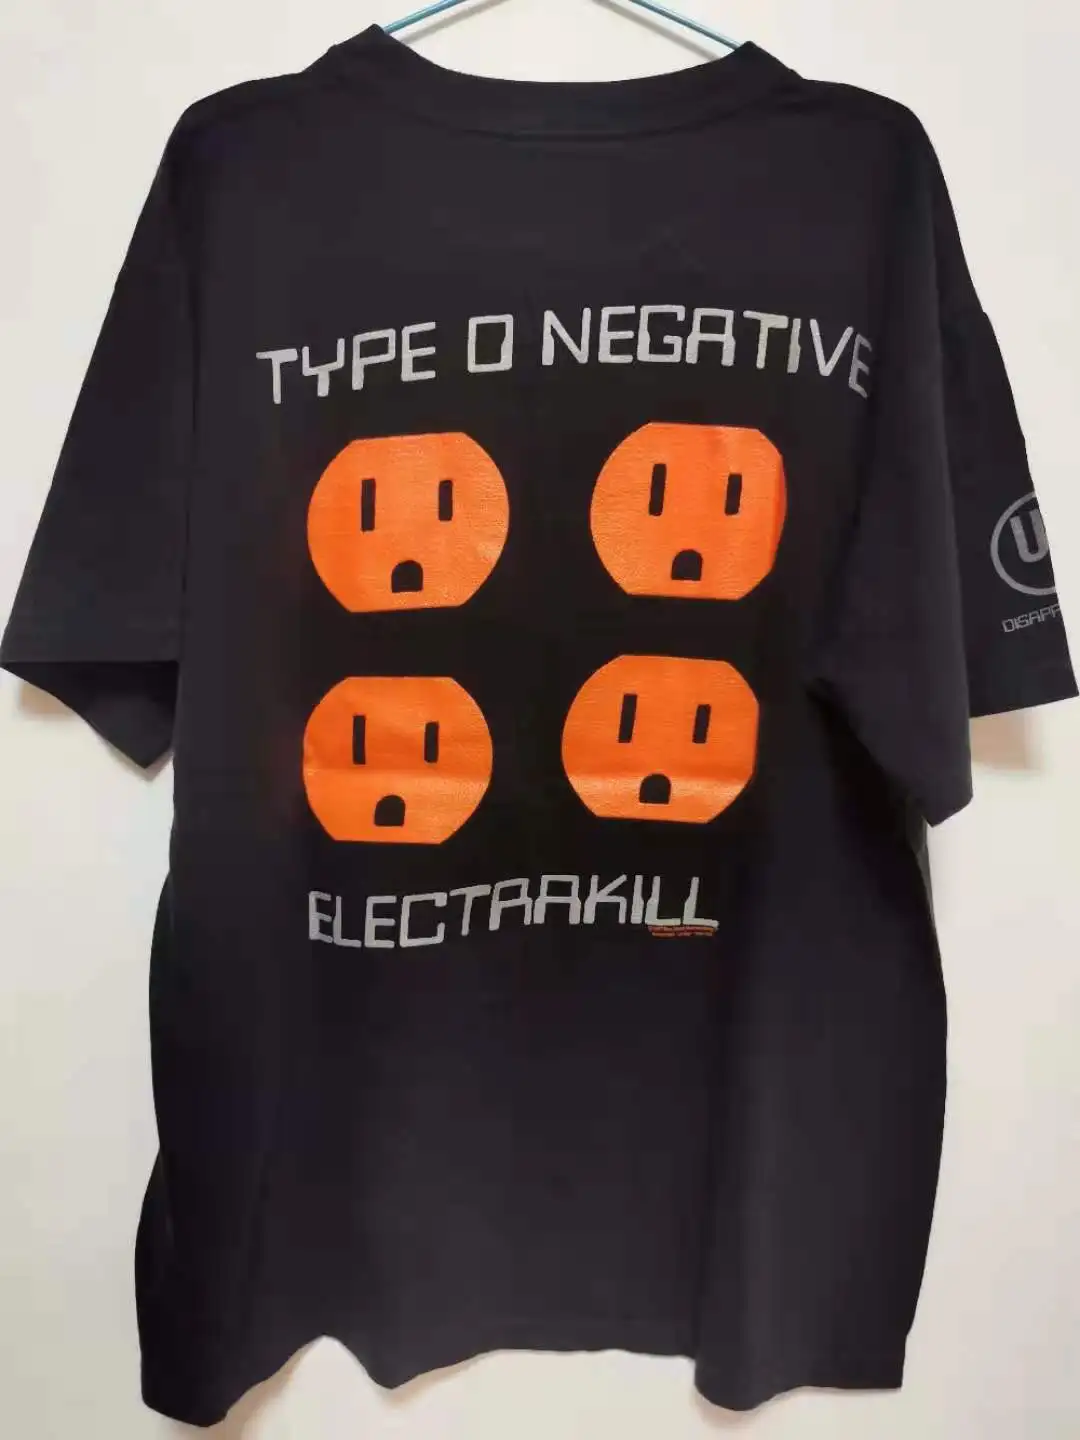 Top Quality High street  Vintage Wash old TYPE O NEGATIVE  fashion ECECTRAKILL short-sleeved T-shirt